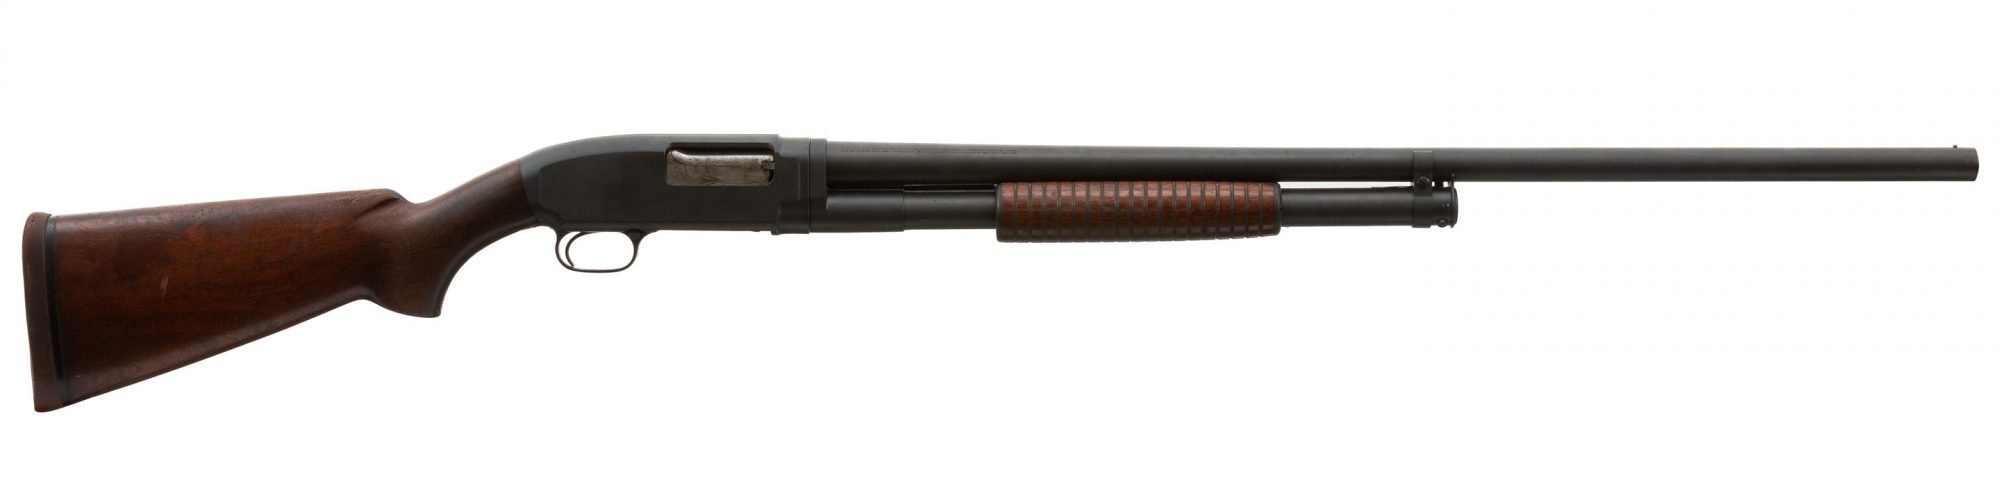 Photo of a Winchester Model 12 shotgun from 1937, for sale by Turnbull Restoration of Bloomfield, NY